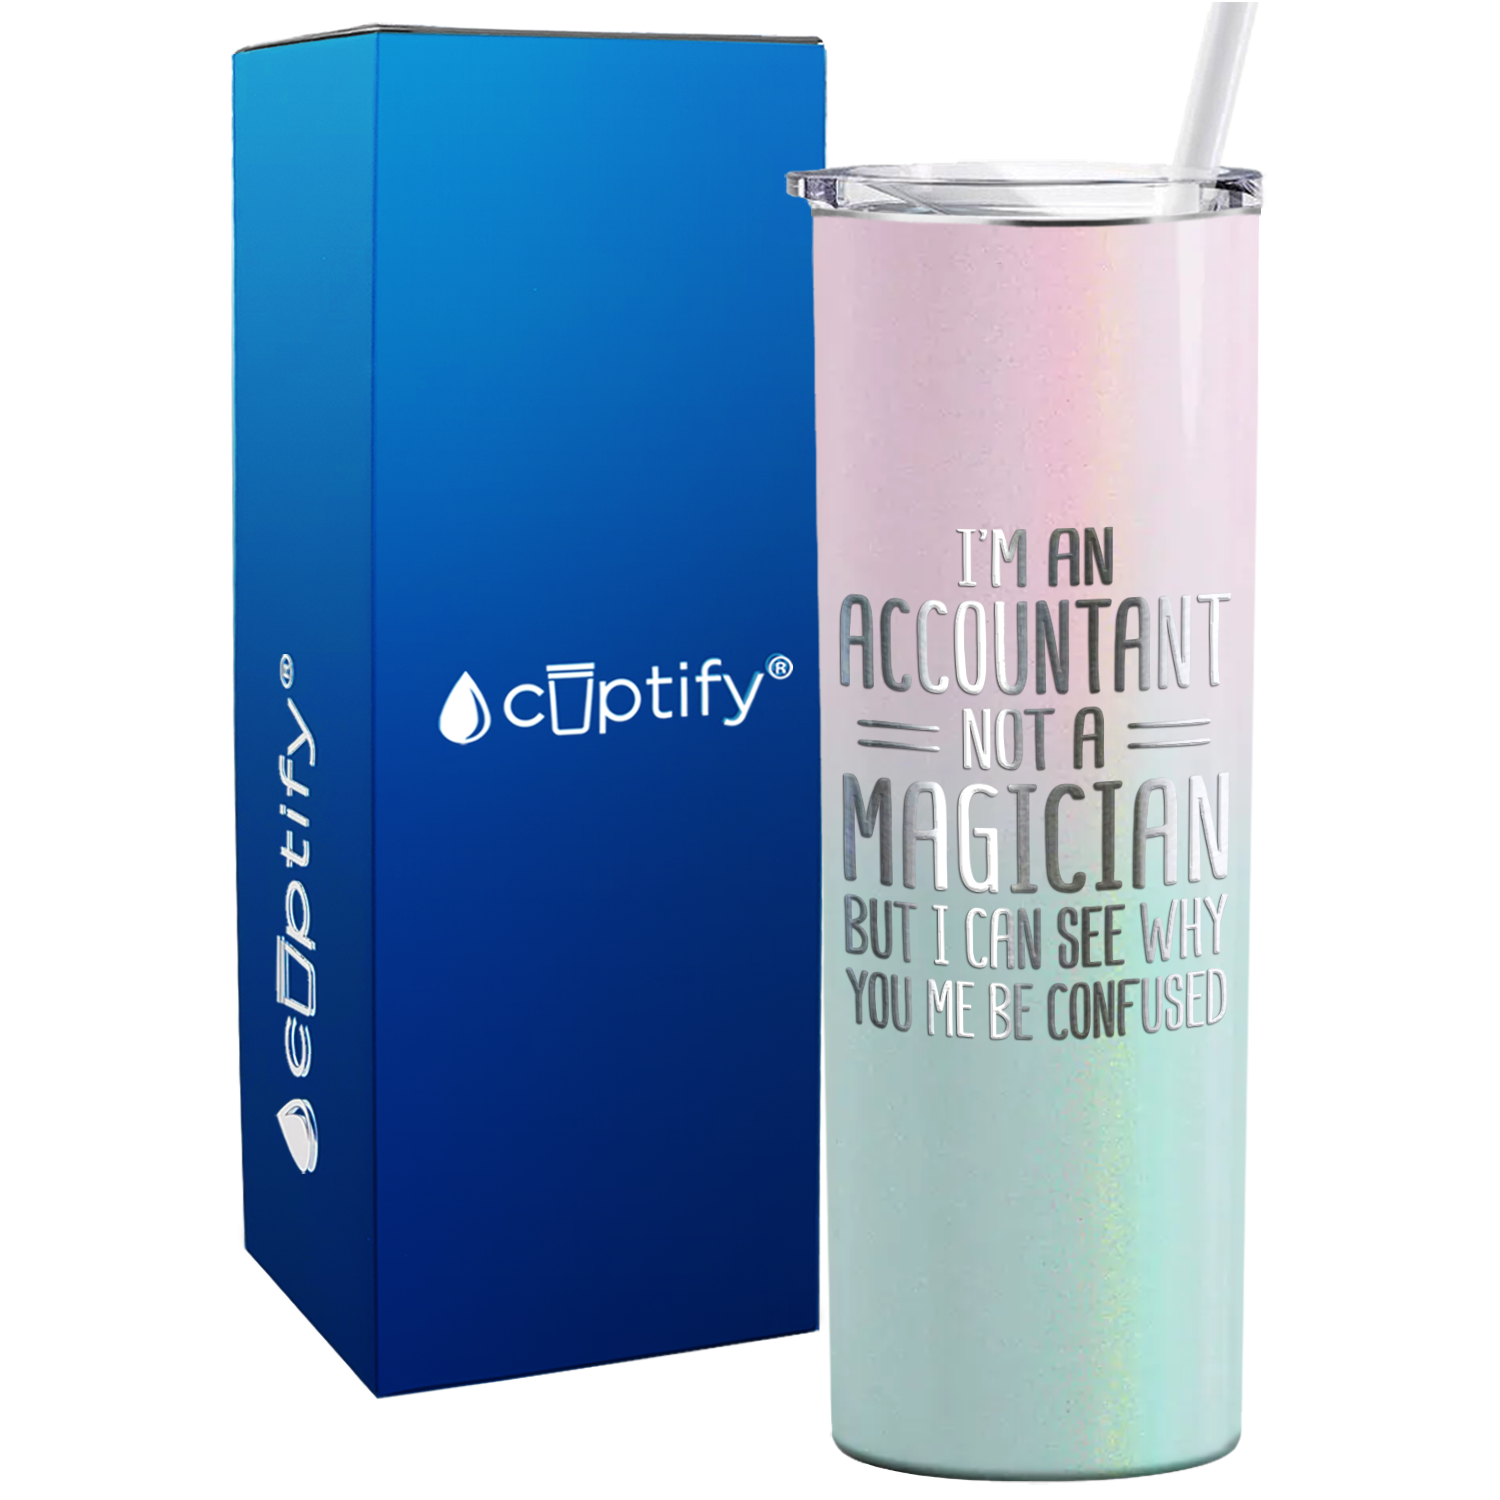 Accountant Not a Magician on 20oz Skinny Stainless Steel Tumbler